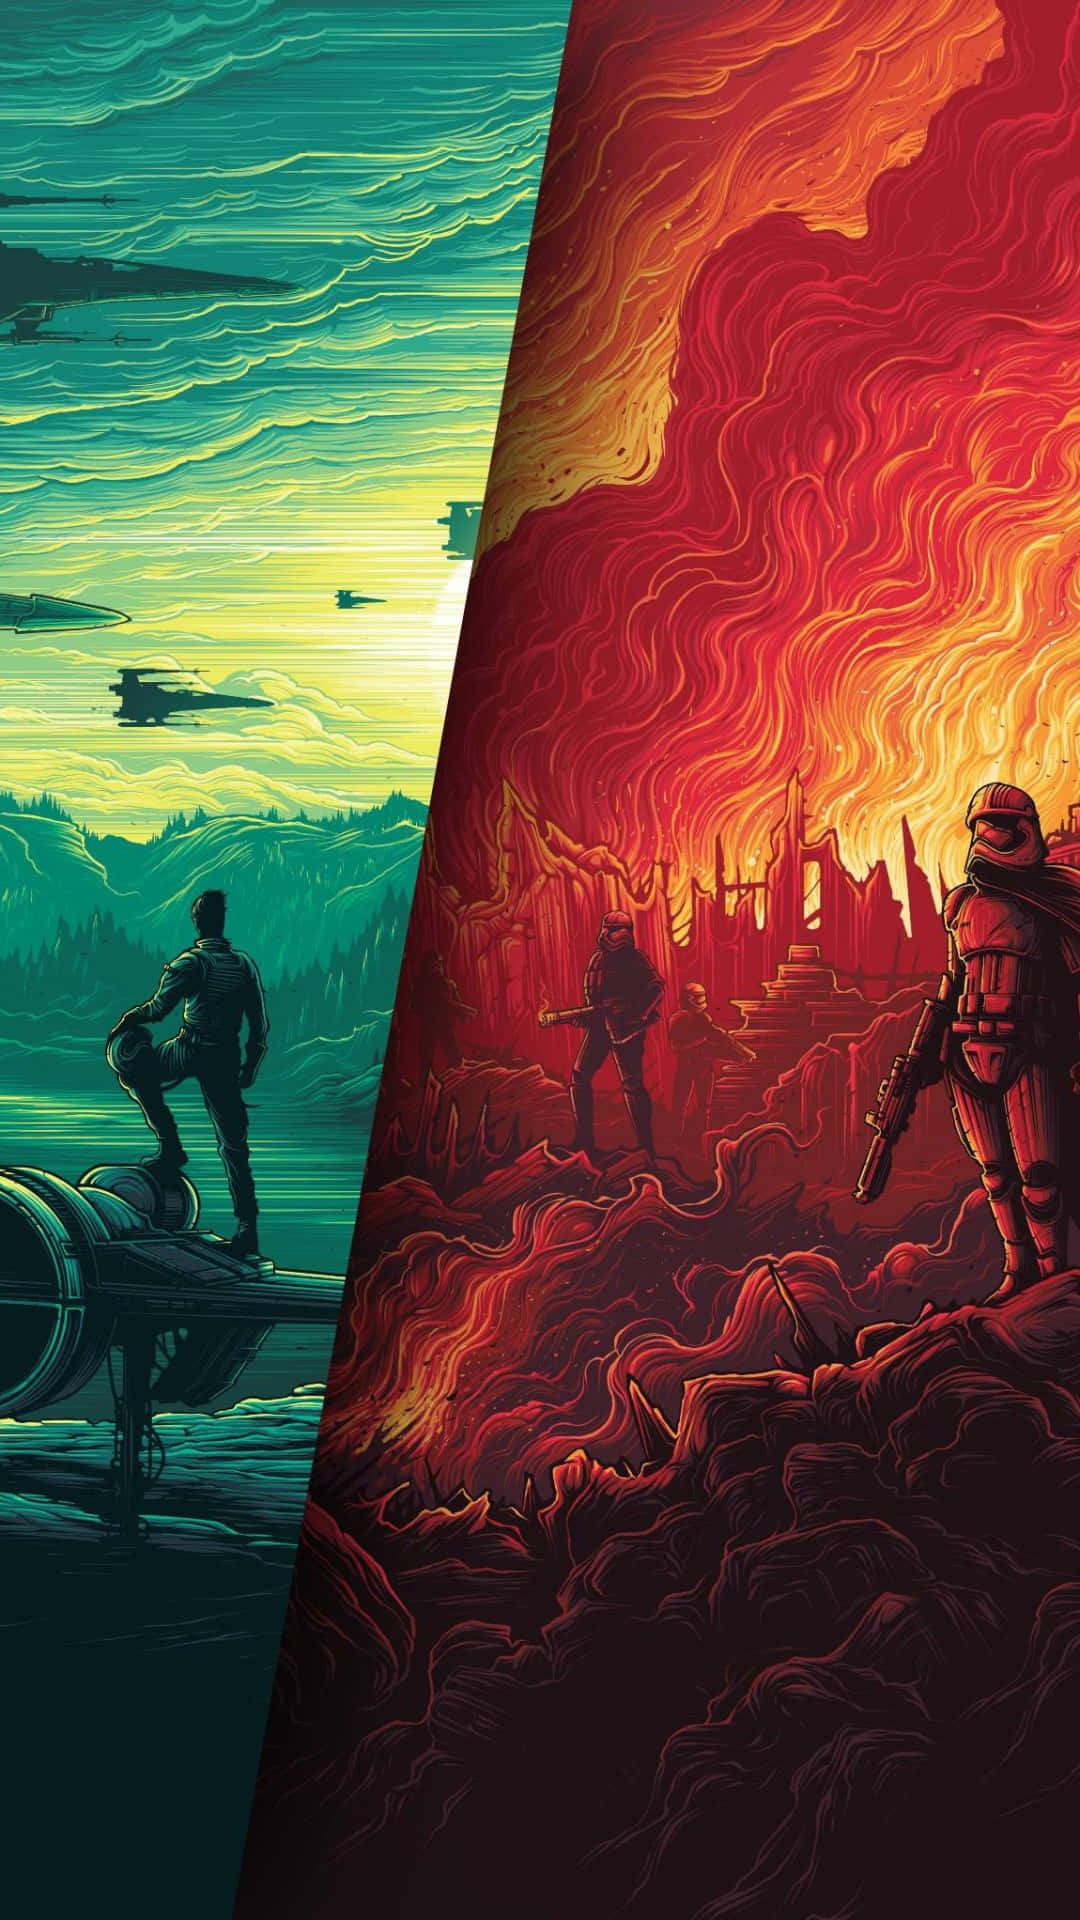 Get Epic With the iPhone Wallpaper